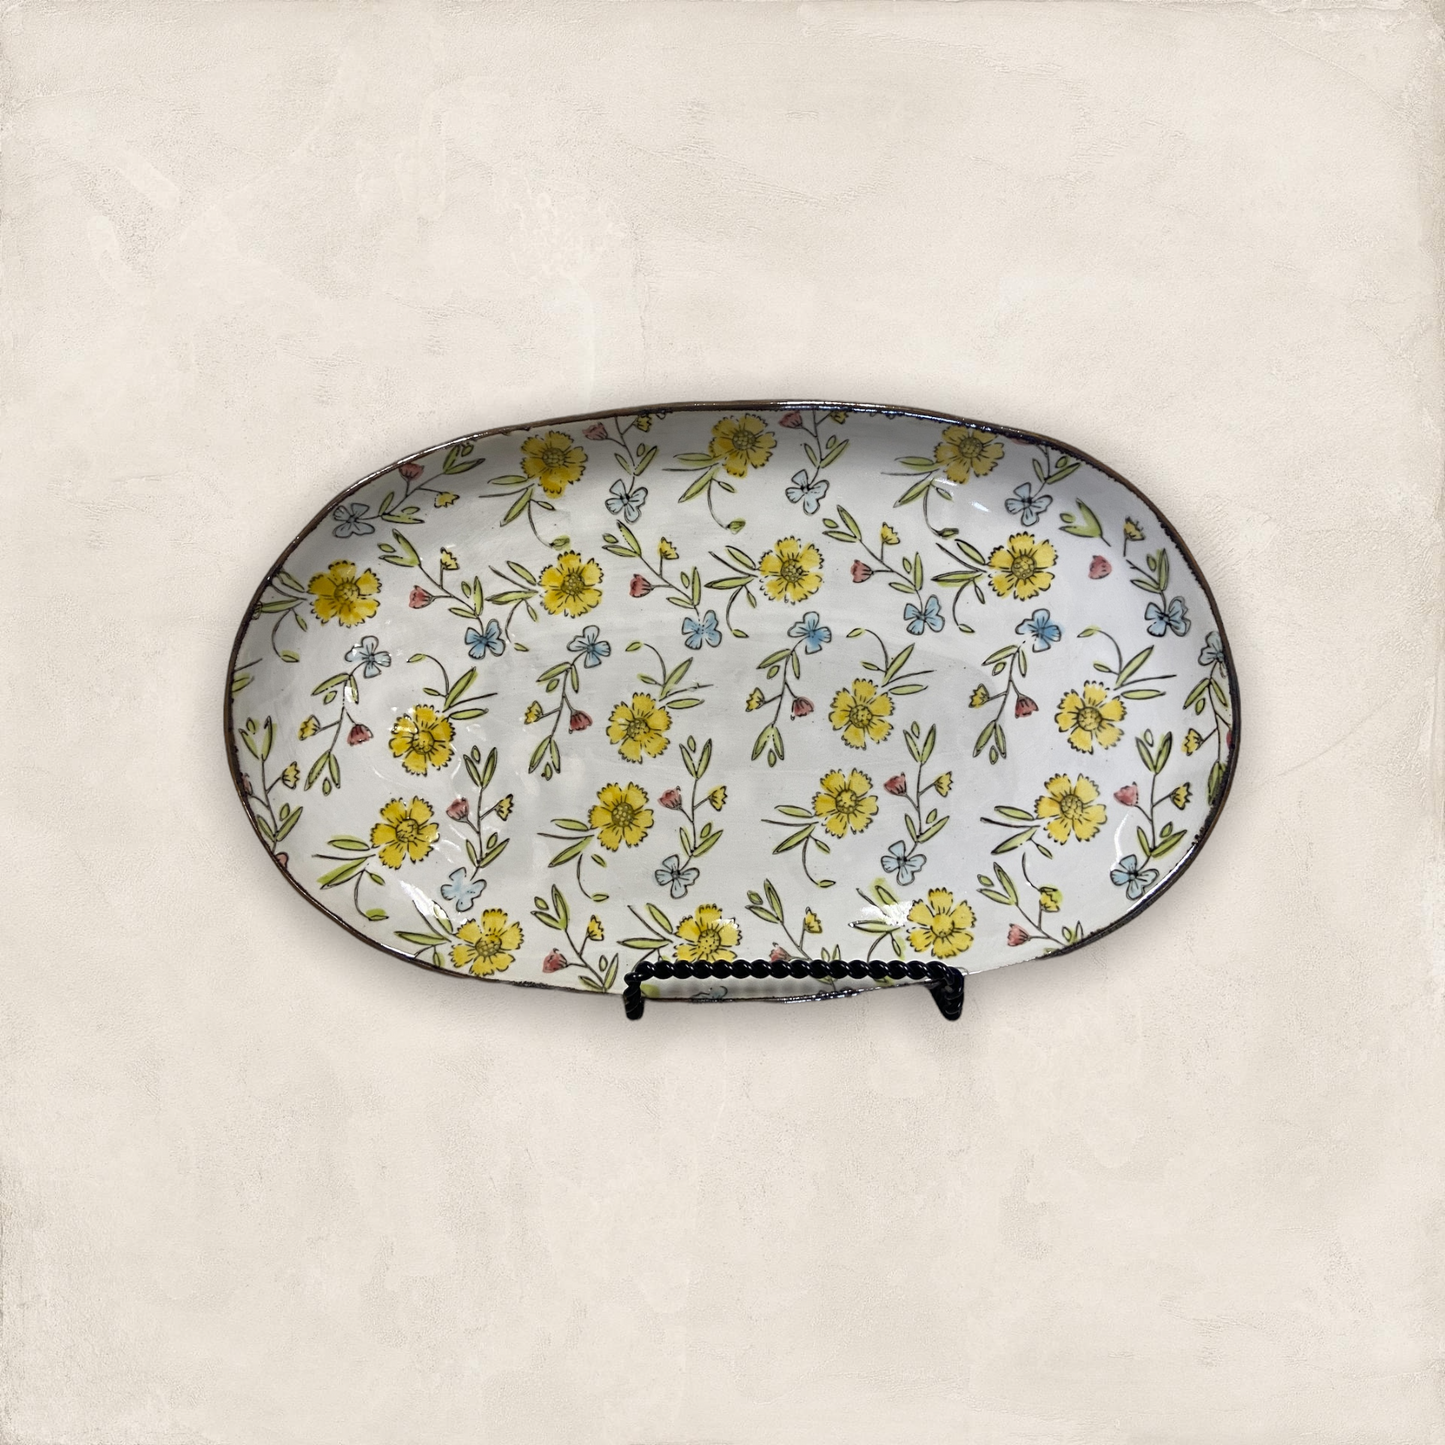 Large floral oval dish